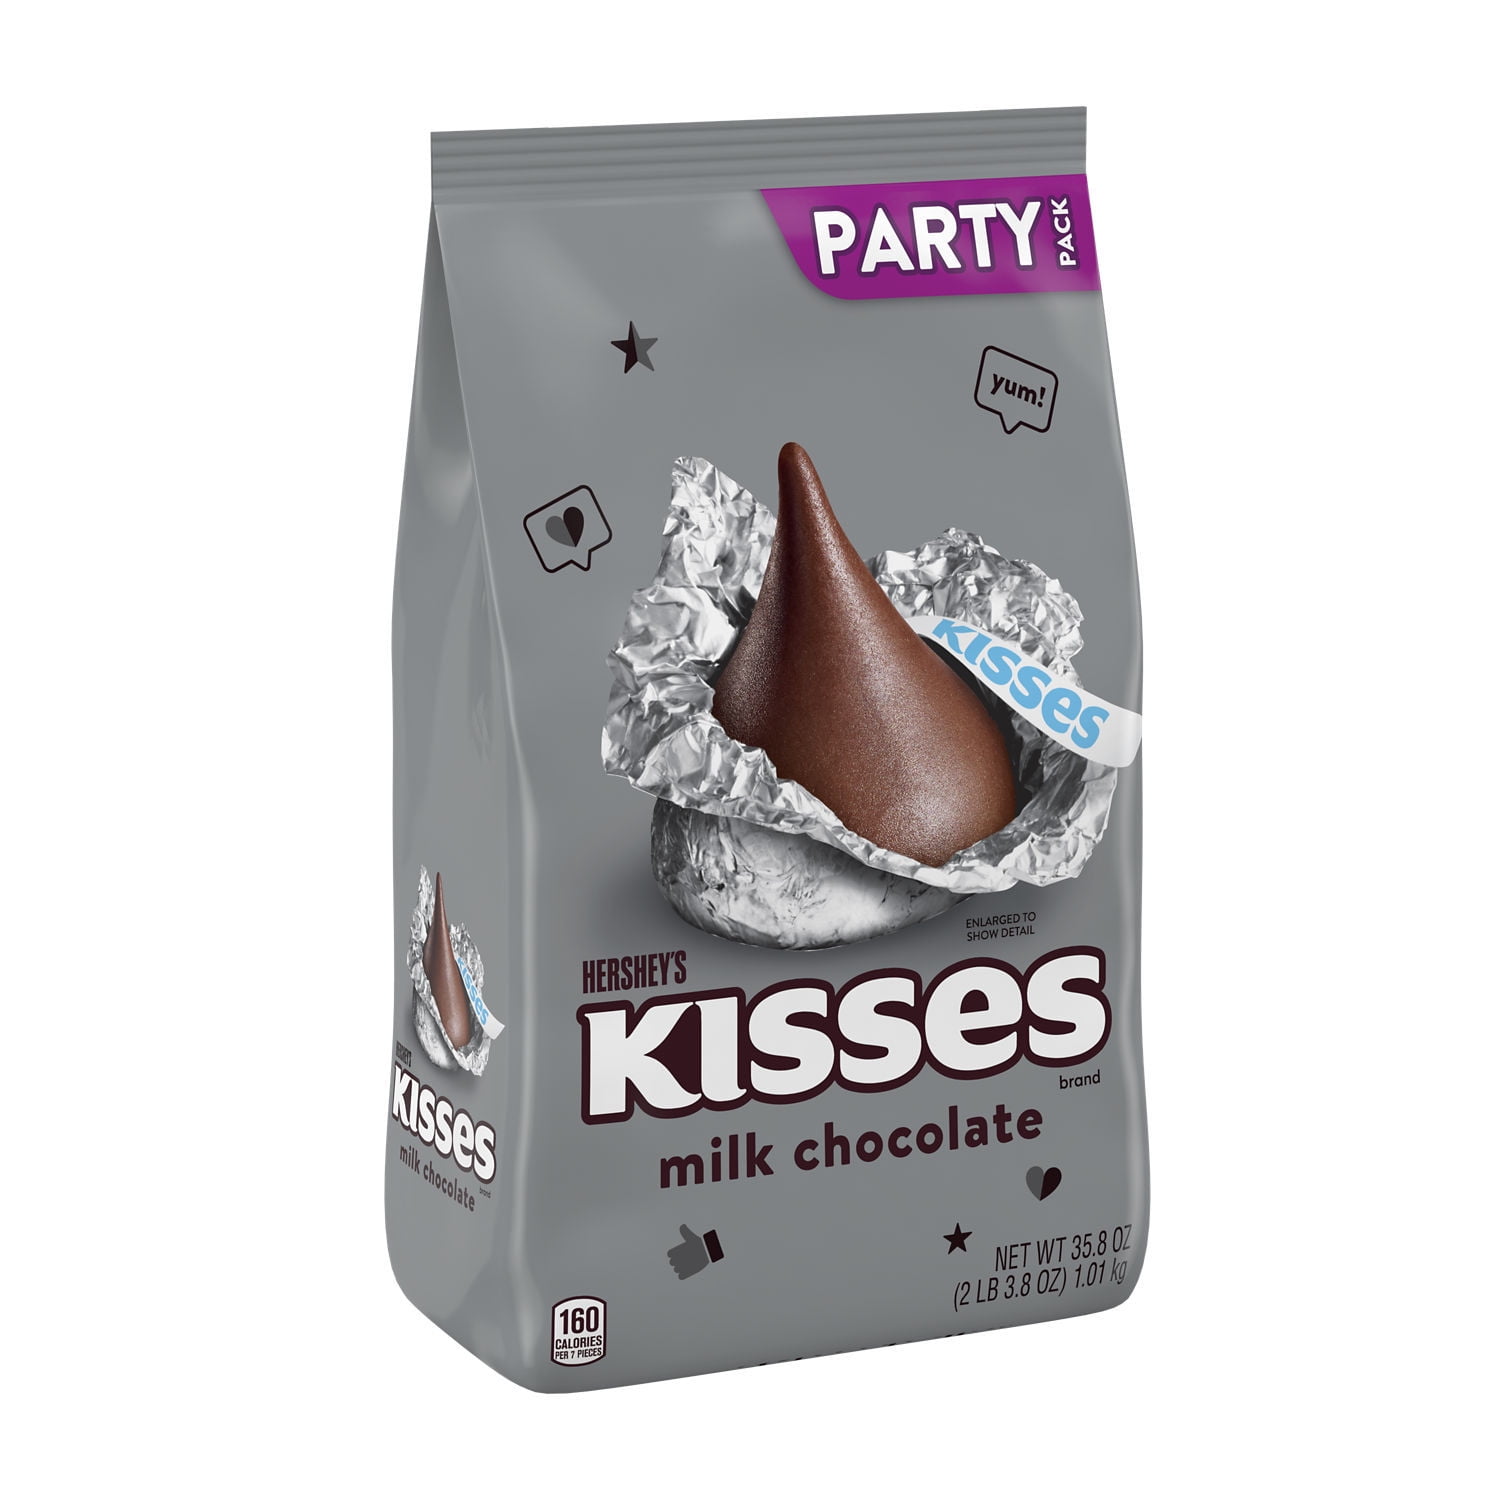  M&M'S Milk Chocolate Candy, Super Bowl Chocolates Party Size,  38 oz Bag : M&M'S: Grocery & Gourmet Food